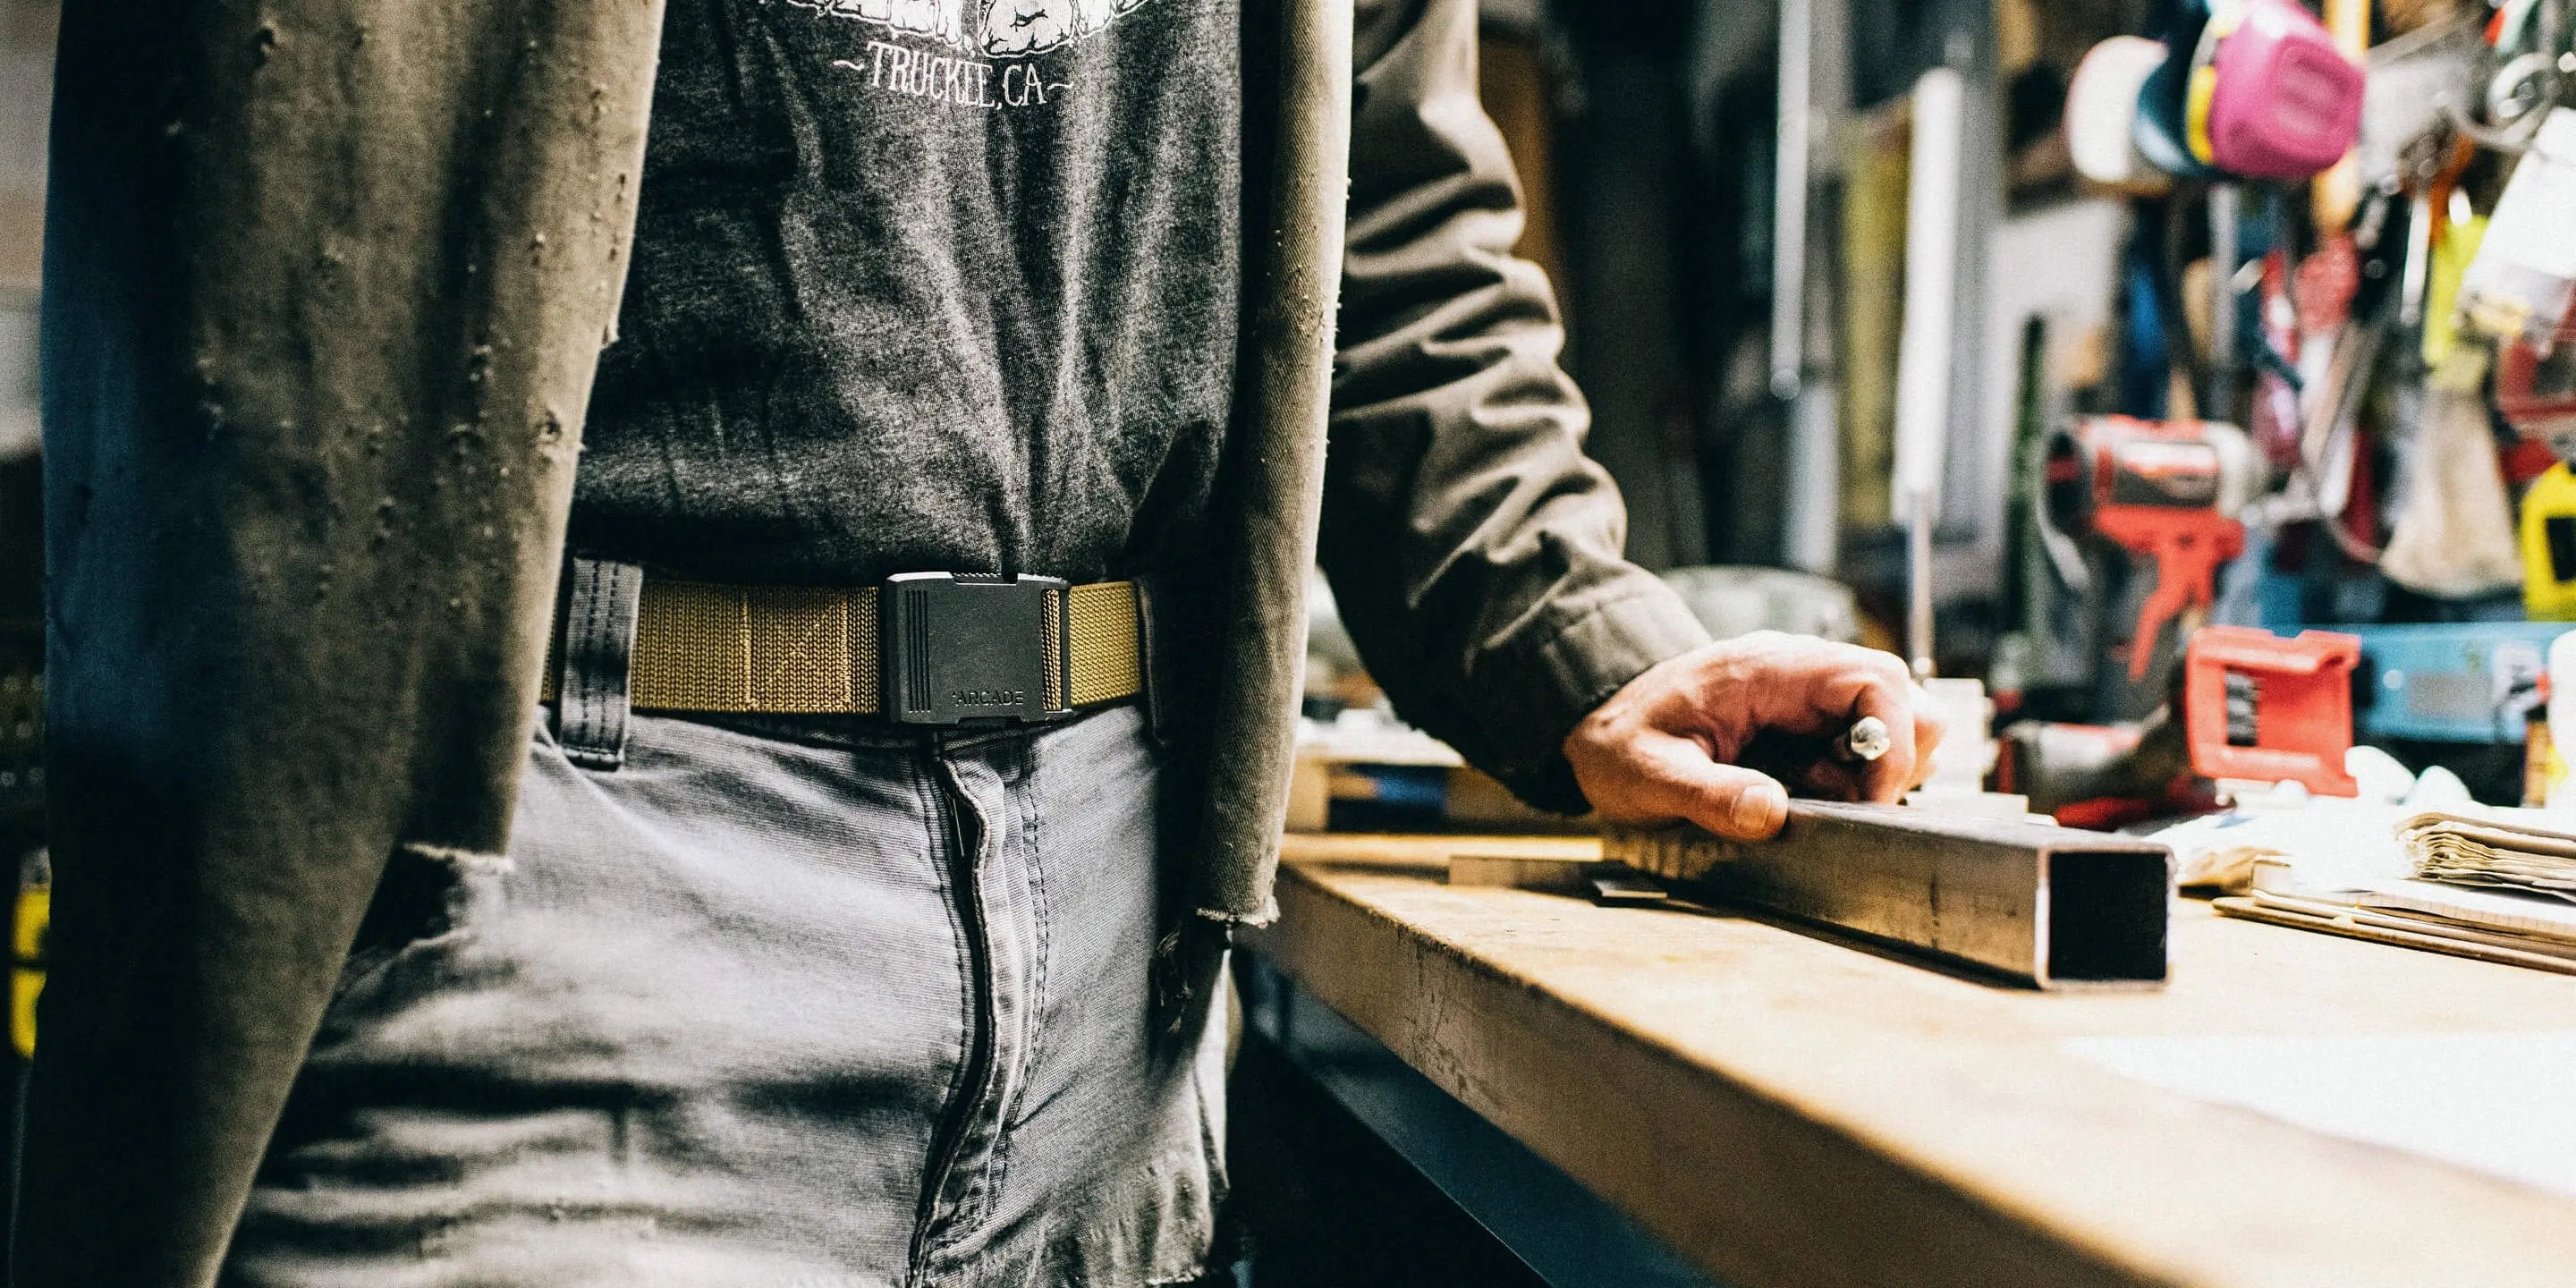 A Man's Guide to Belts